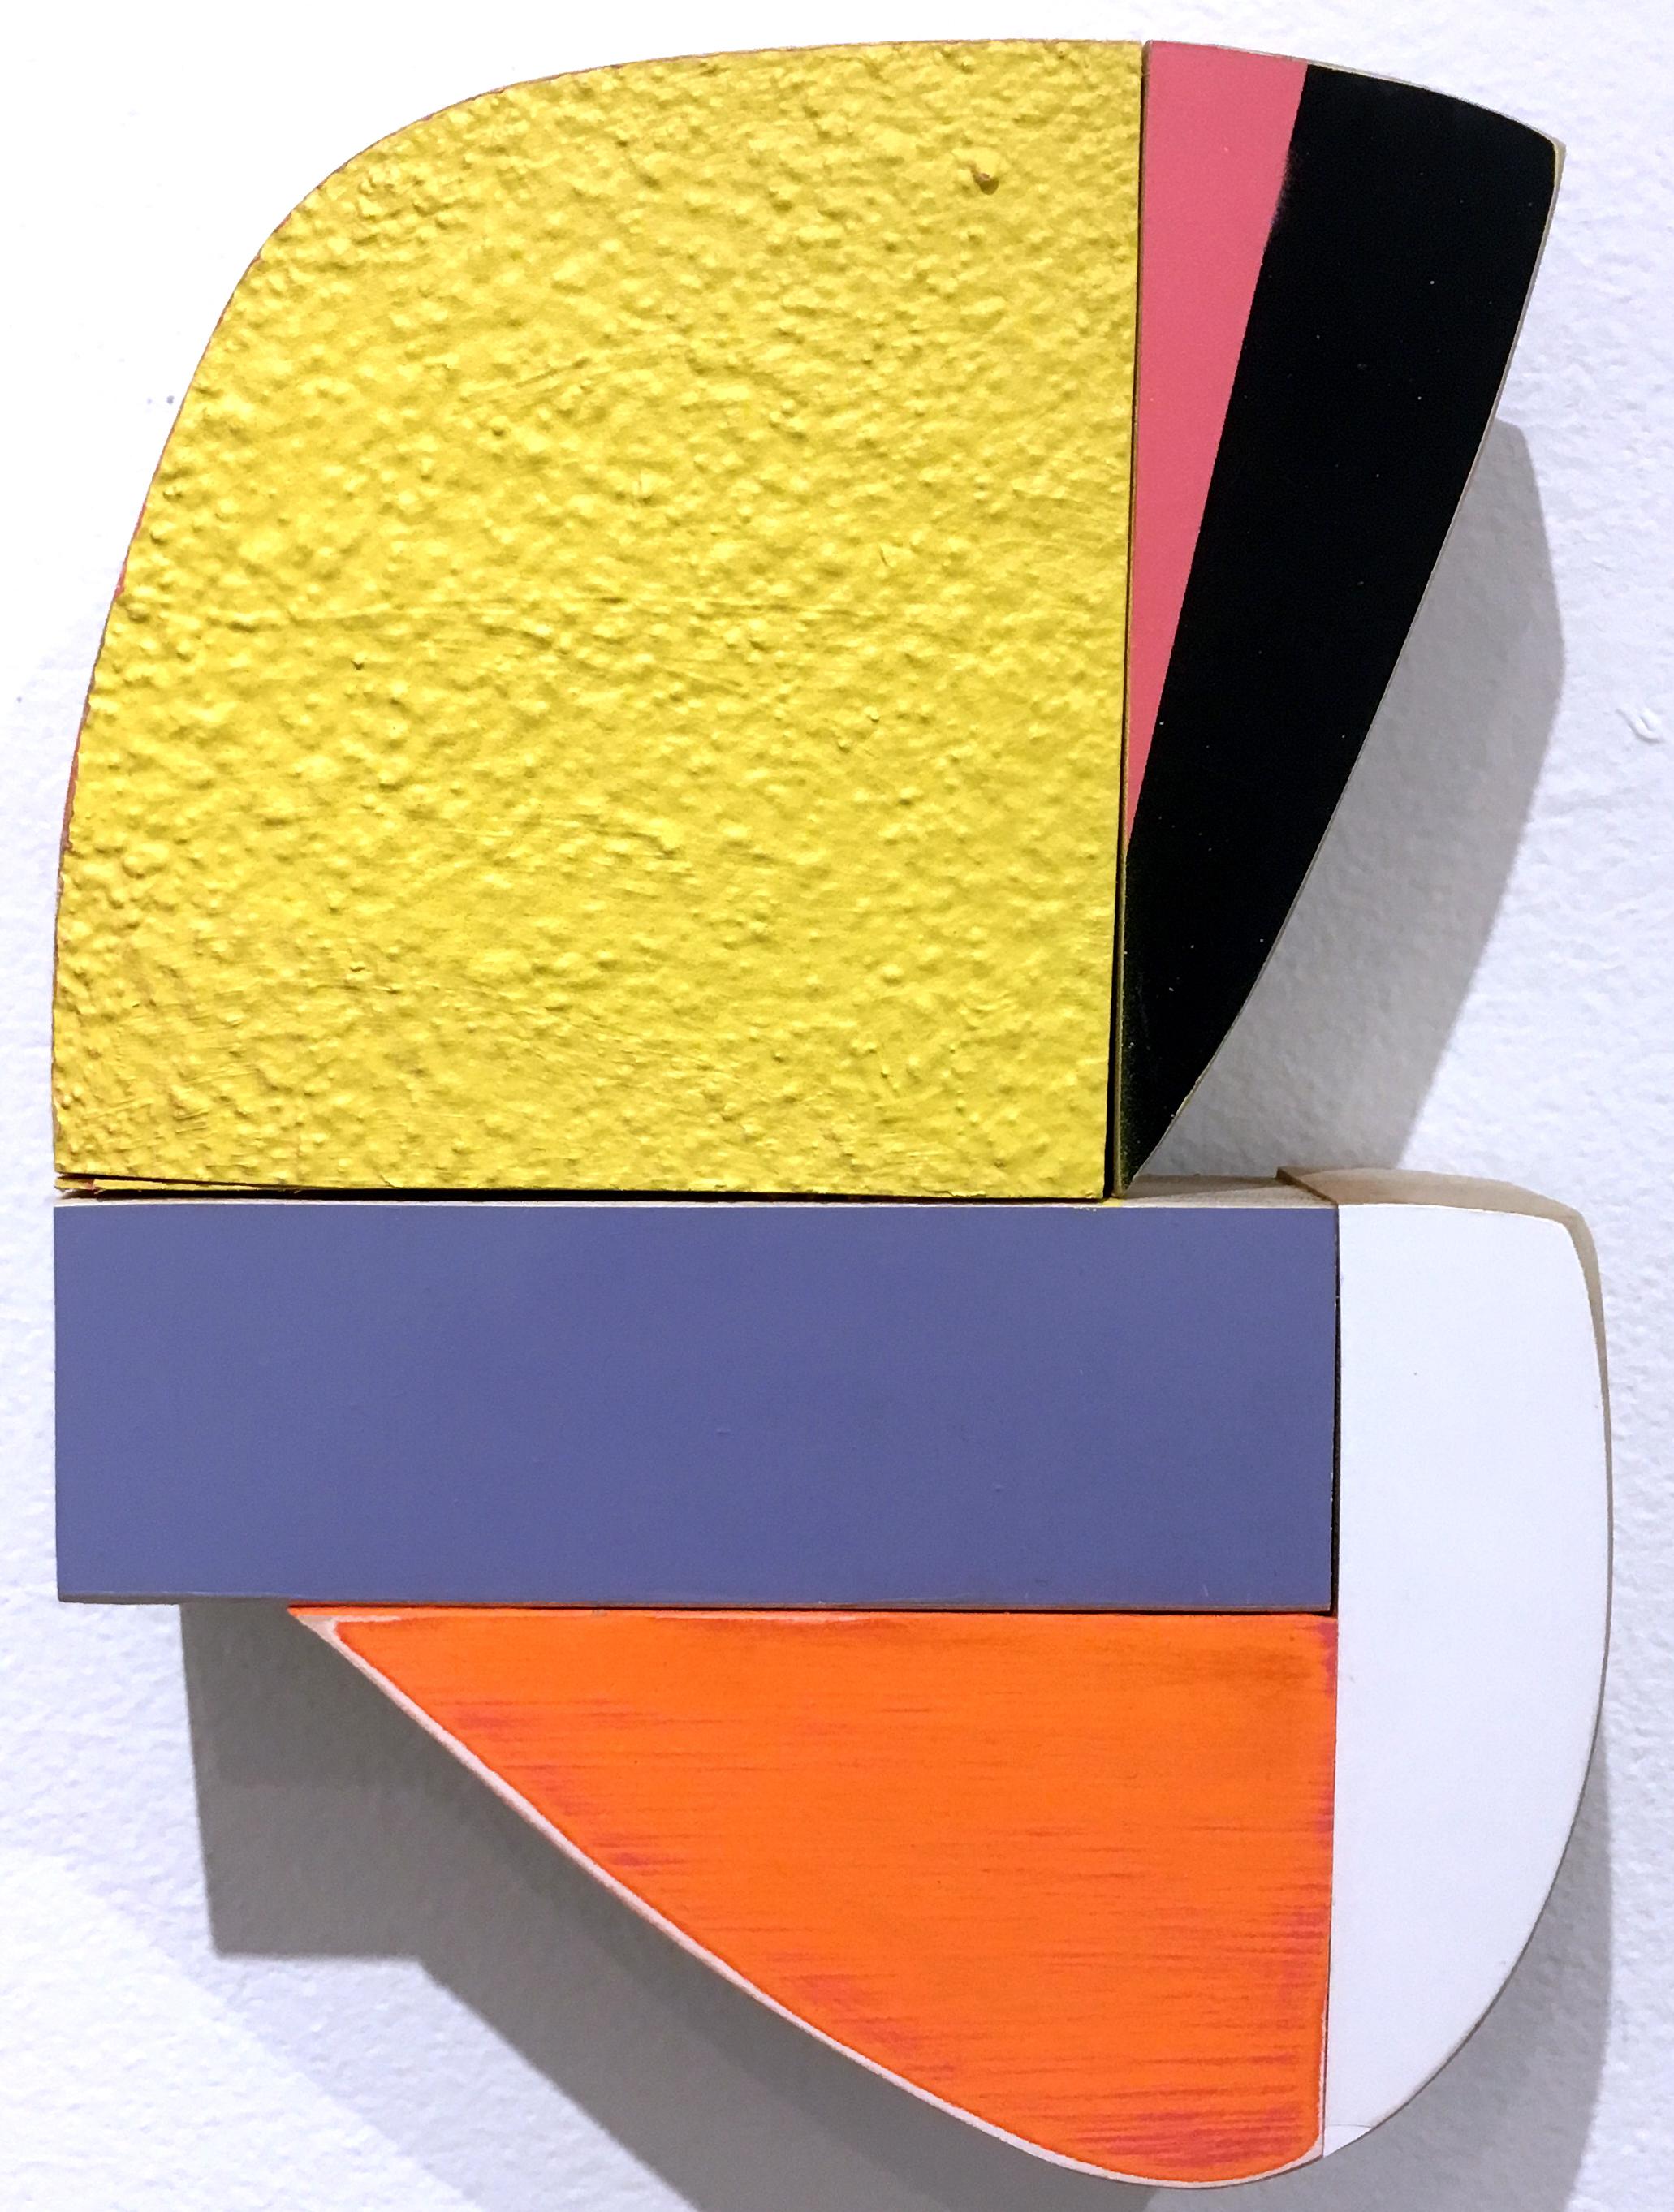 This and That, wood, wall sculpture, acrylic, yellow, pastels, abstract geometric - Abstract Geometric Mixed Media Art by Andrew Zimmerman